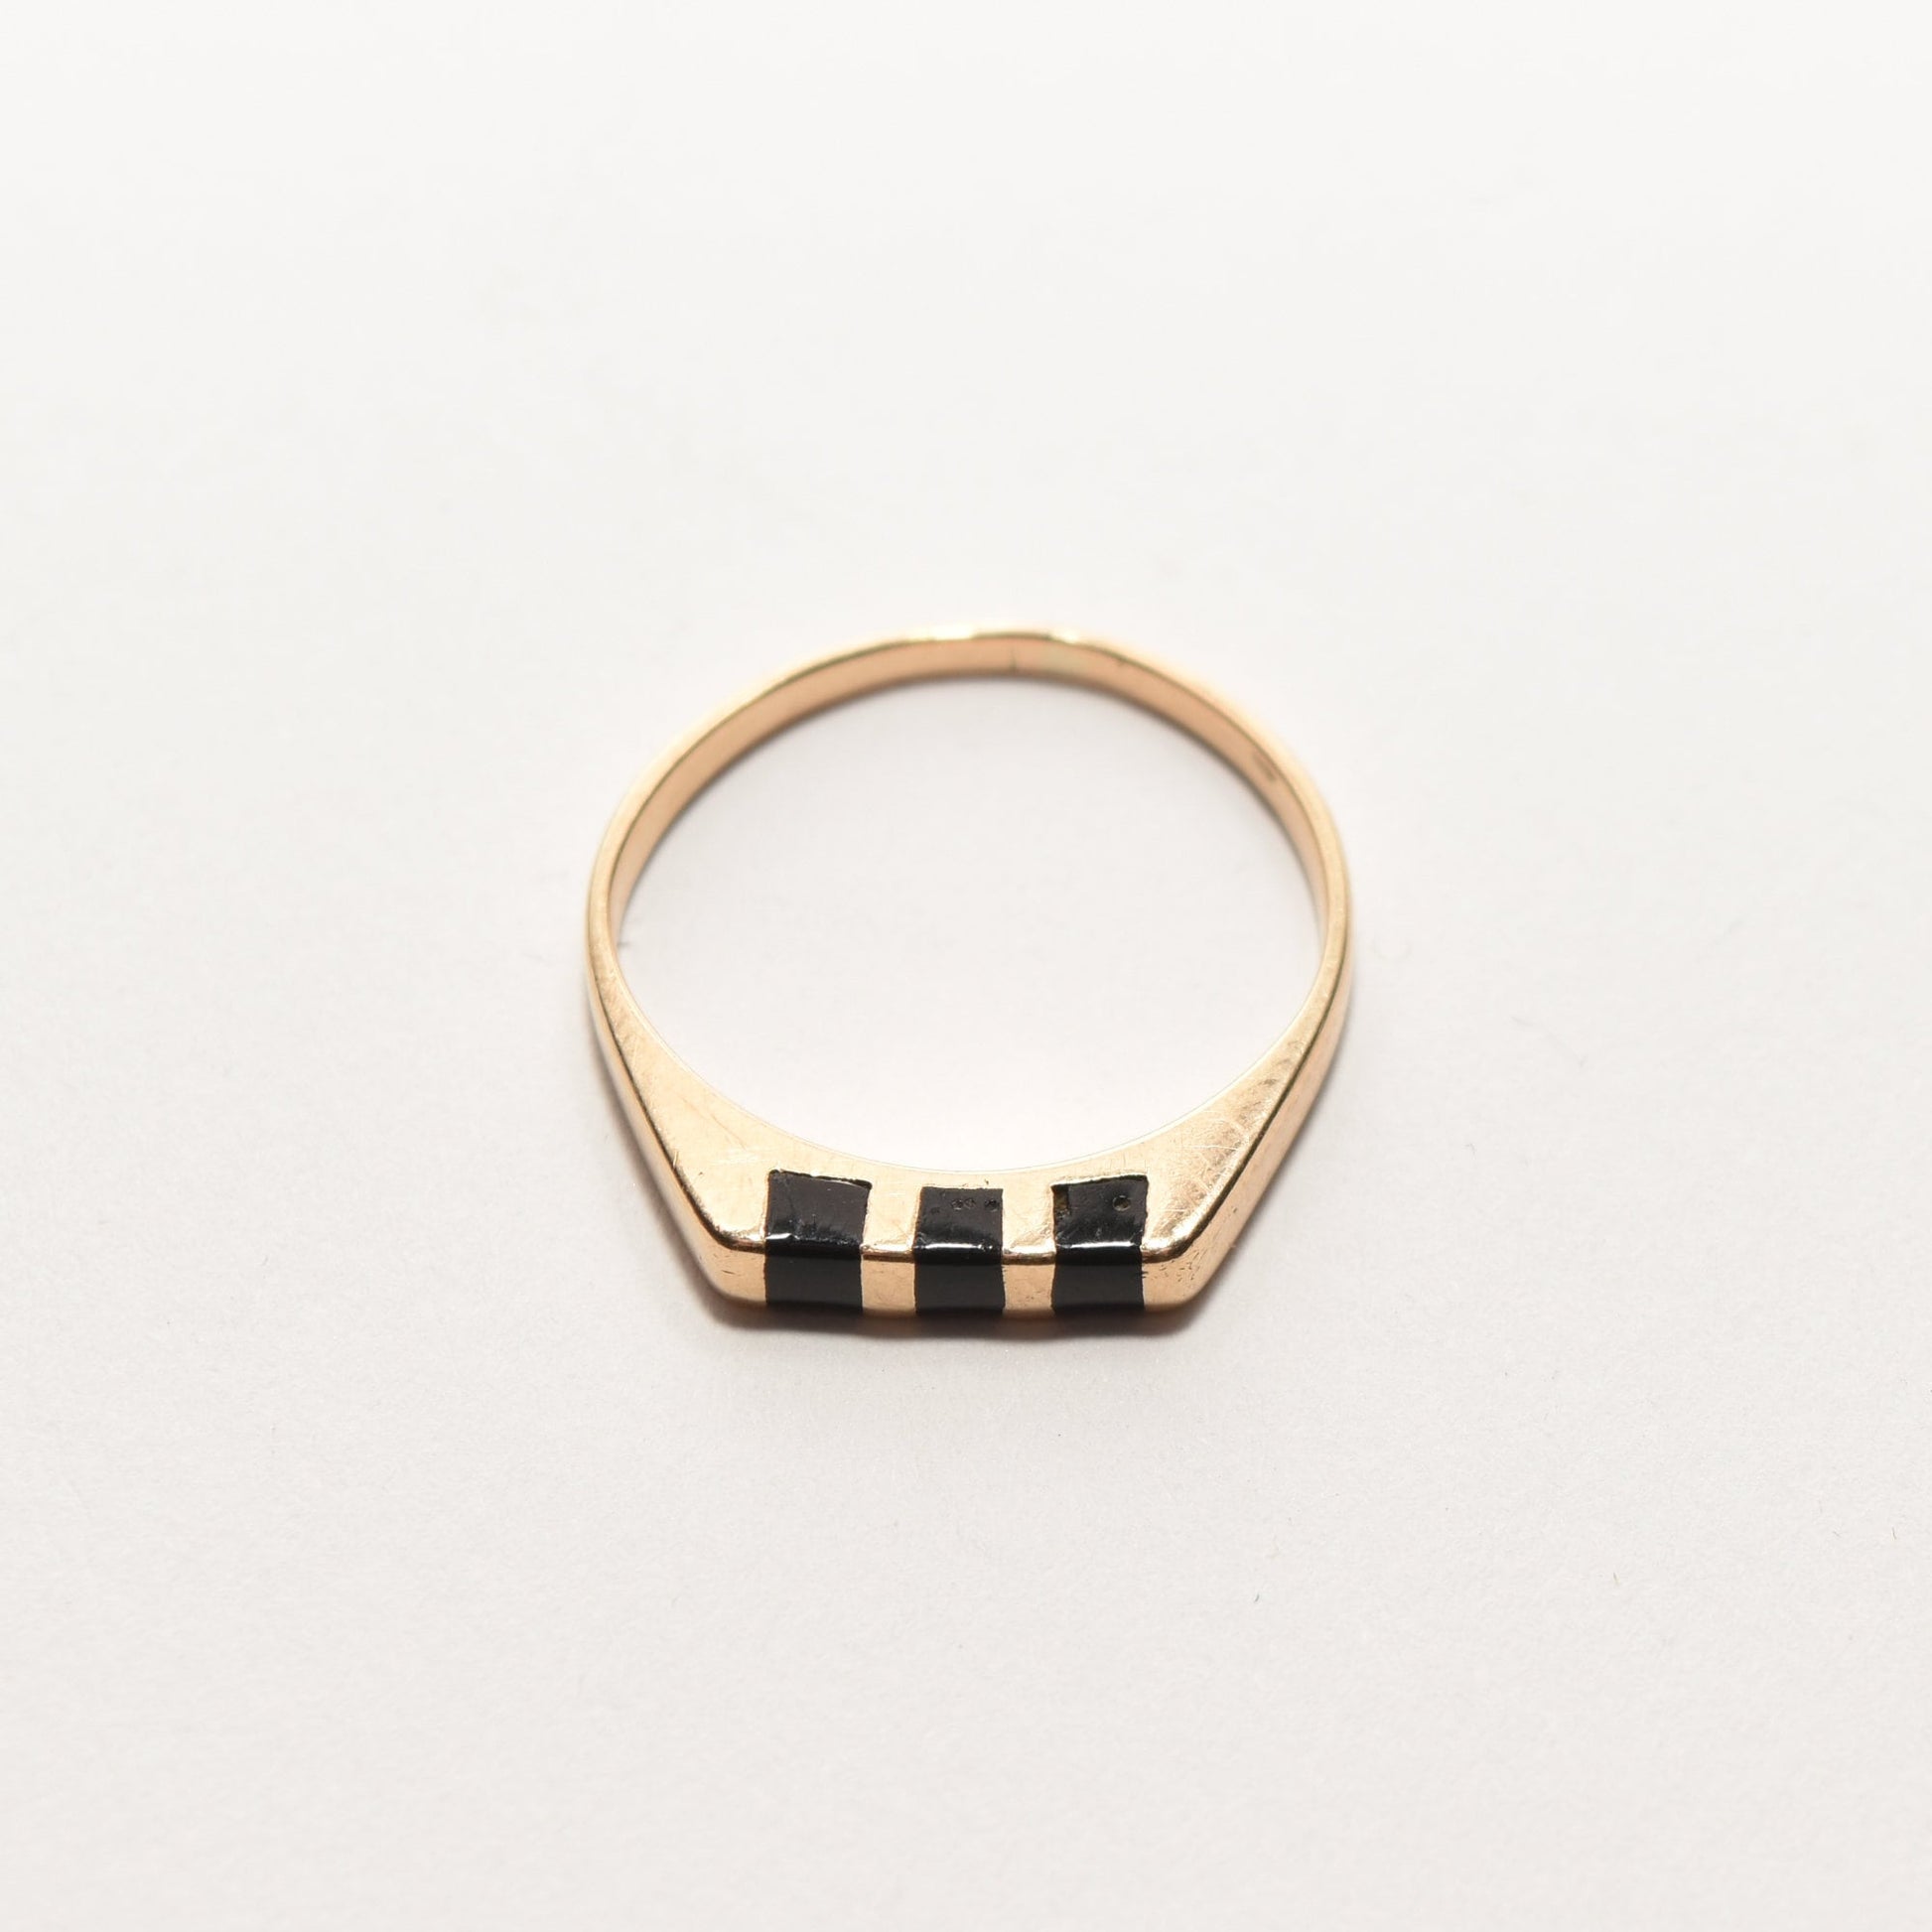 Minimalist 14K gold stacking ring with black onyx inlay, size 5.5, displayed on white background.